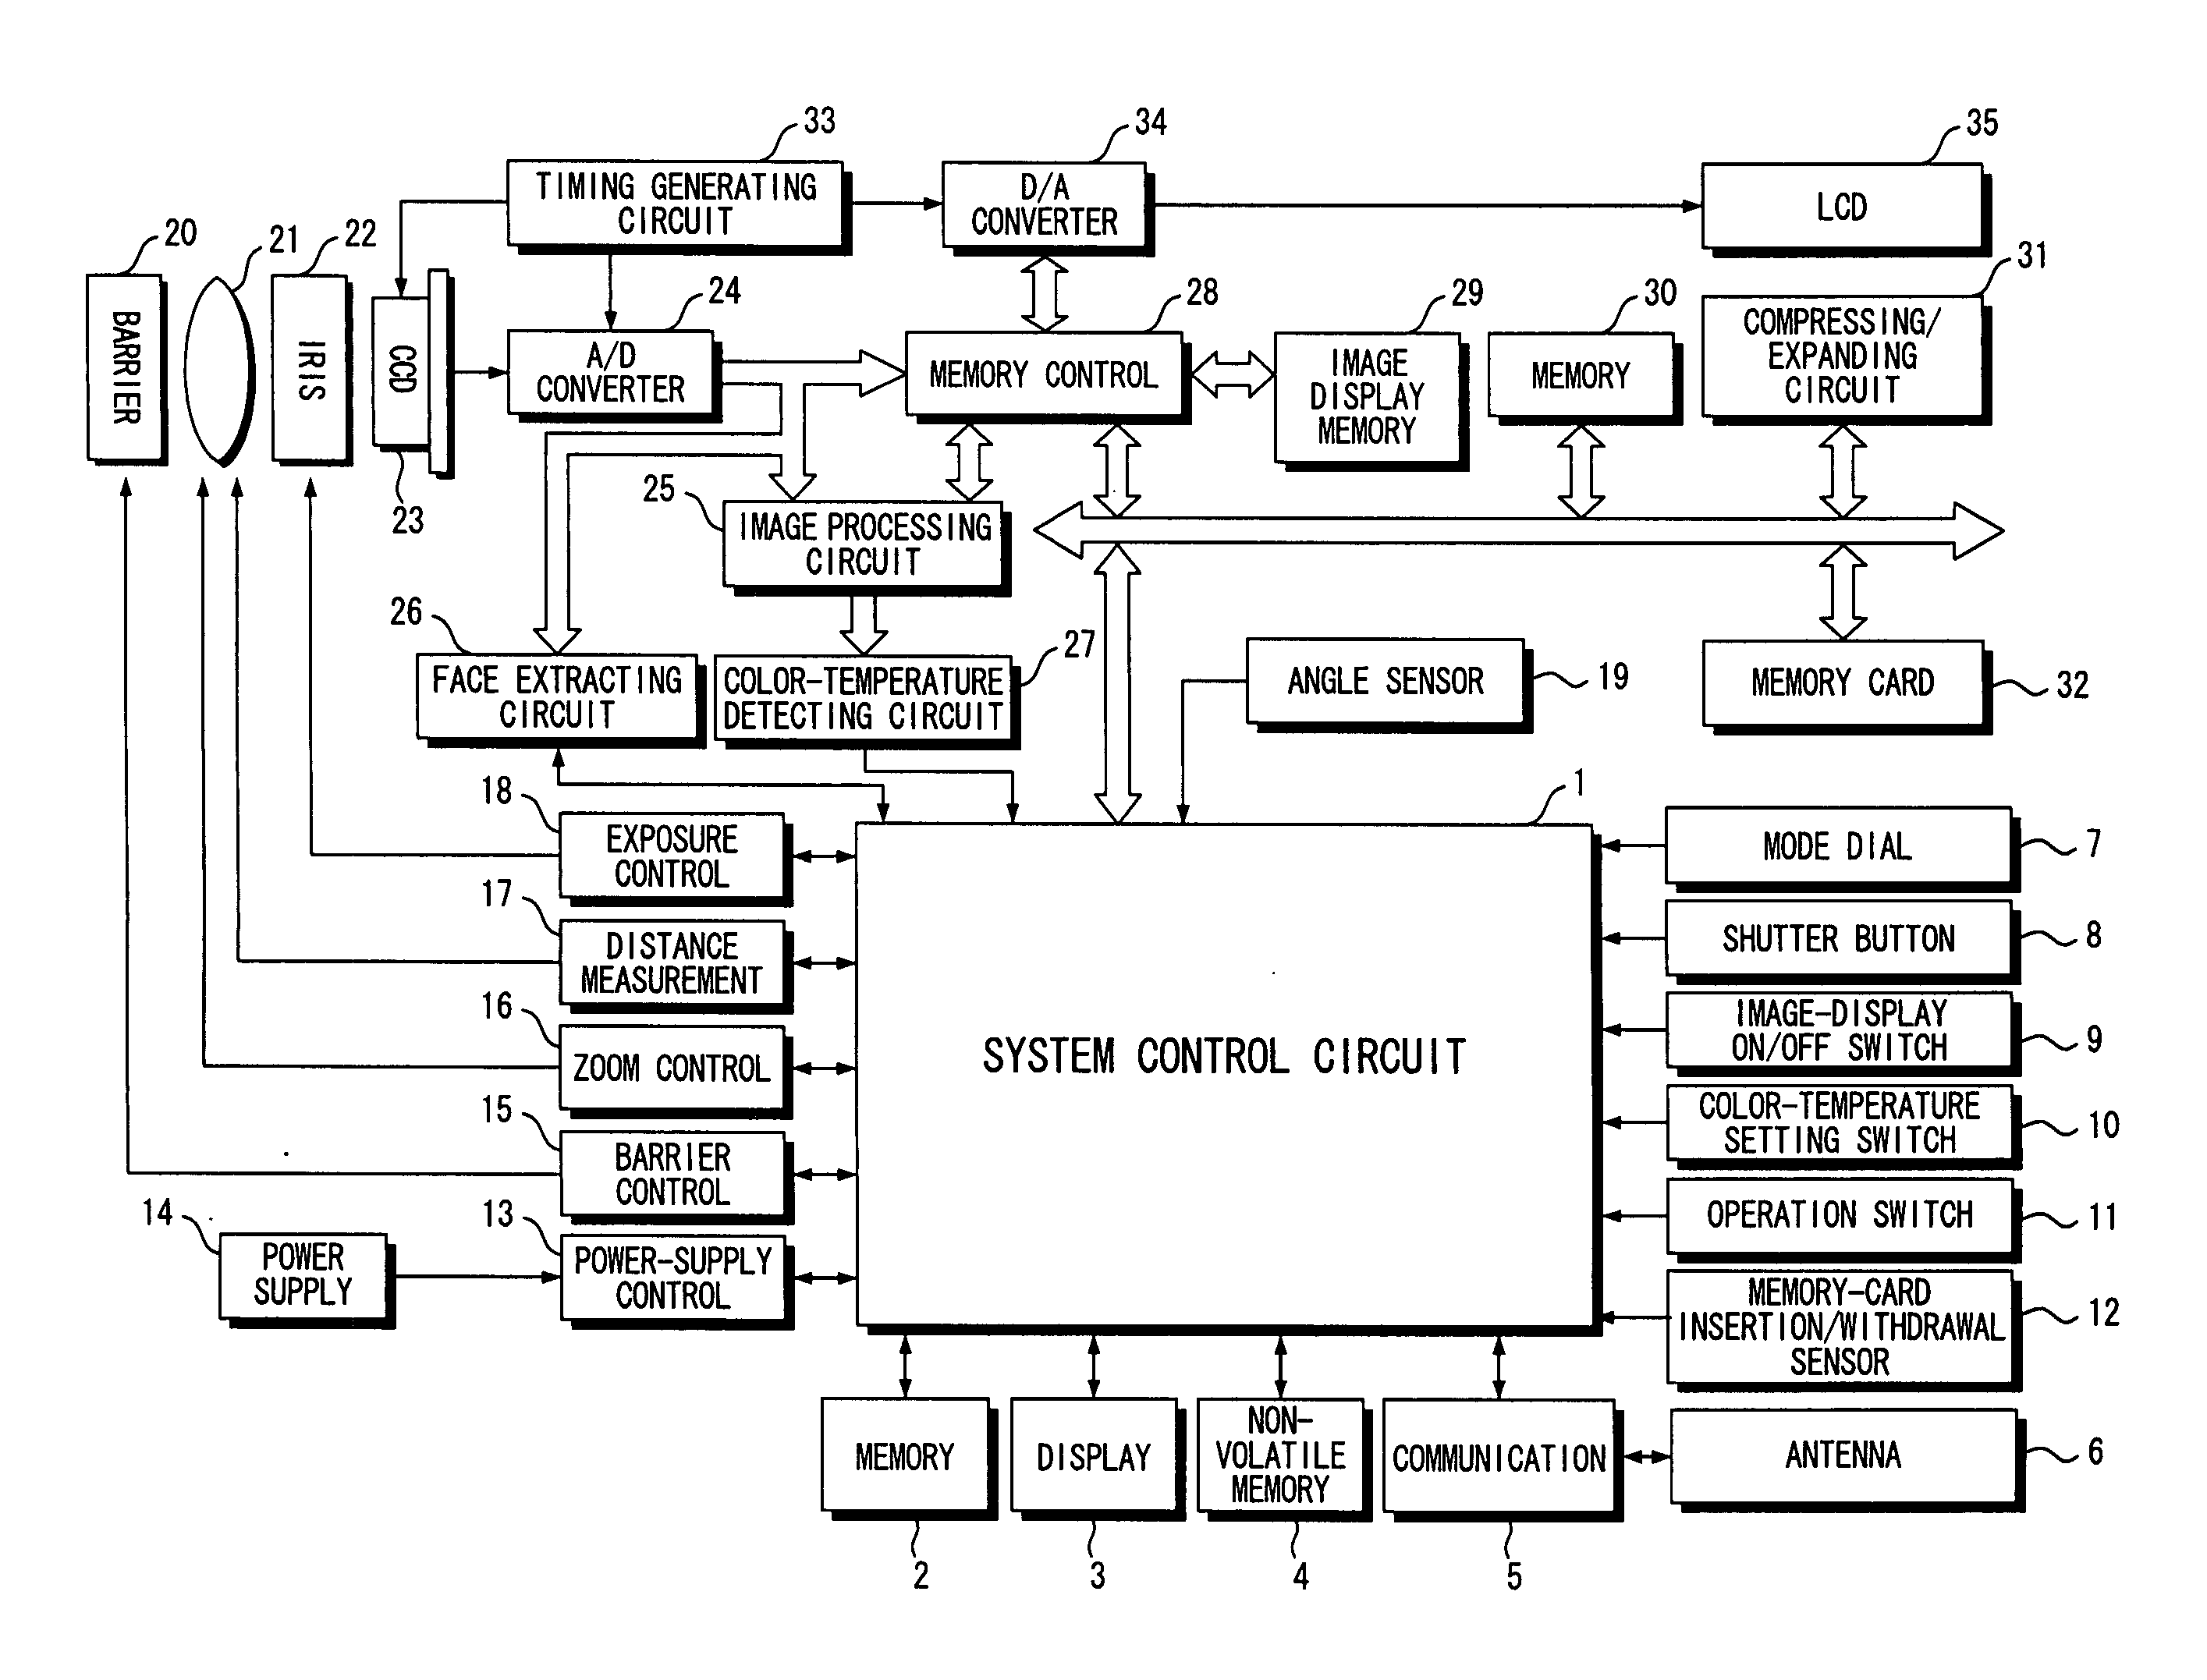 Target-image search apparatus, digital camera and methods of controlling same